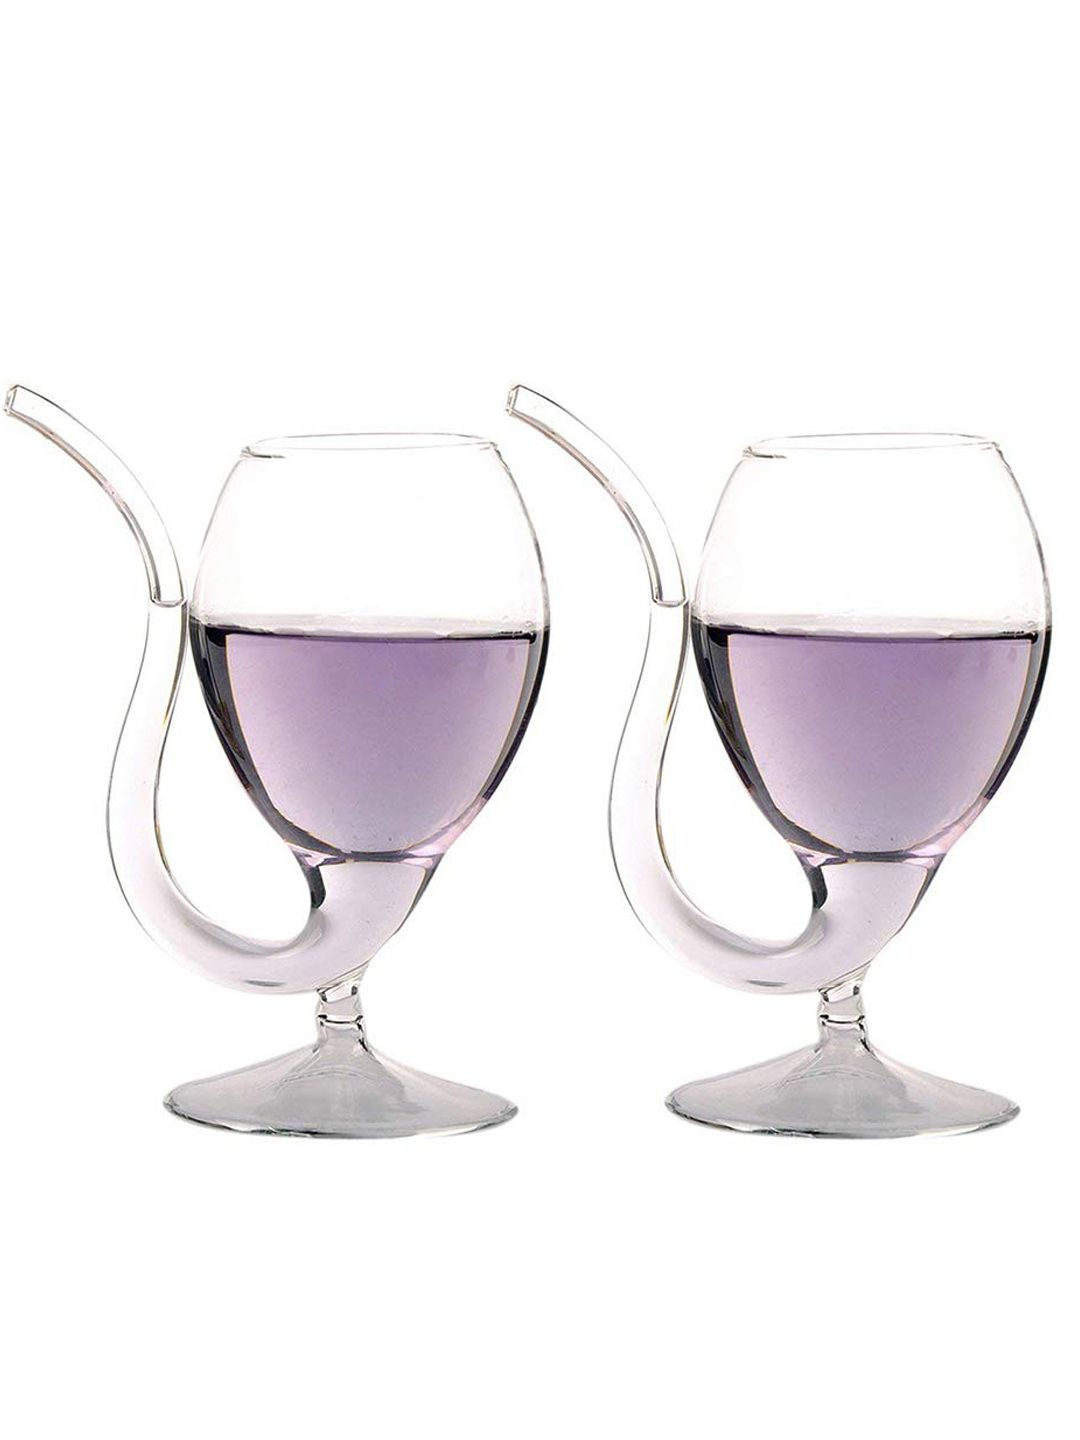 BonZeaL Transparent Printed Glass Transparent Cups Set of Cups and Mugs Price in India